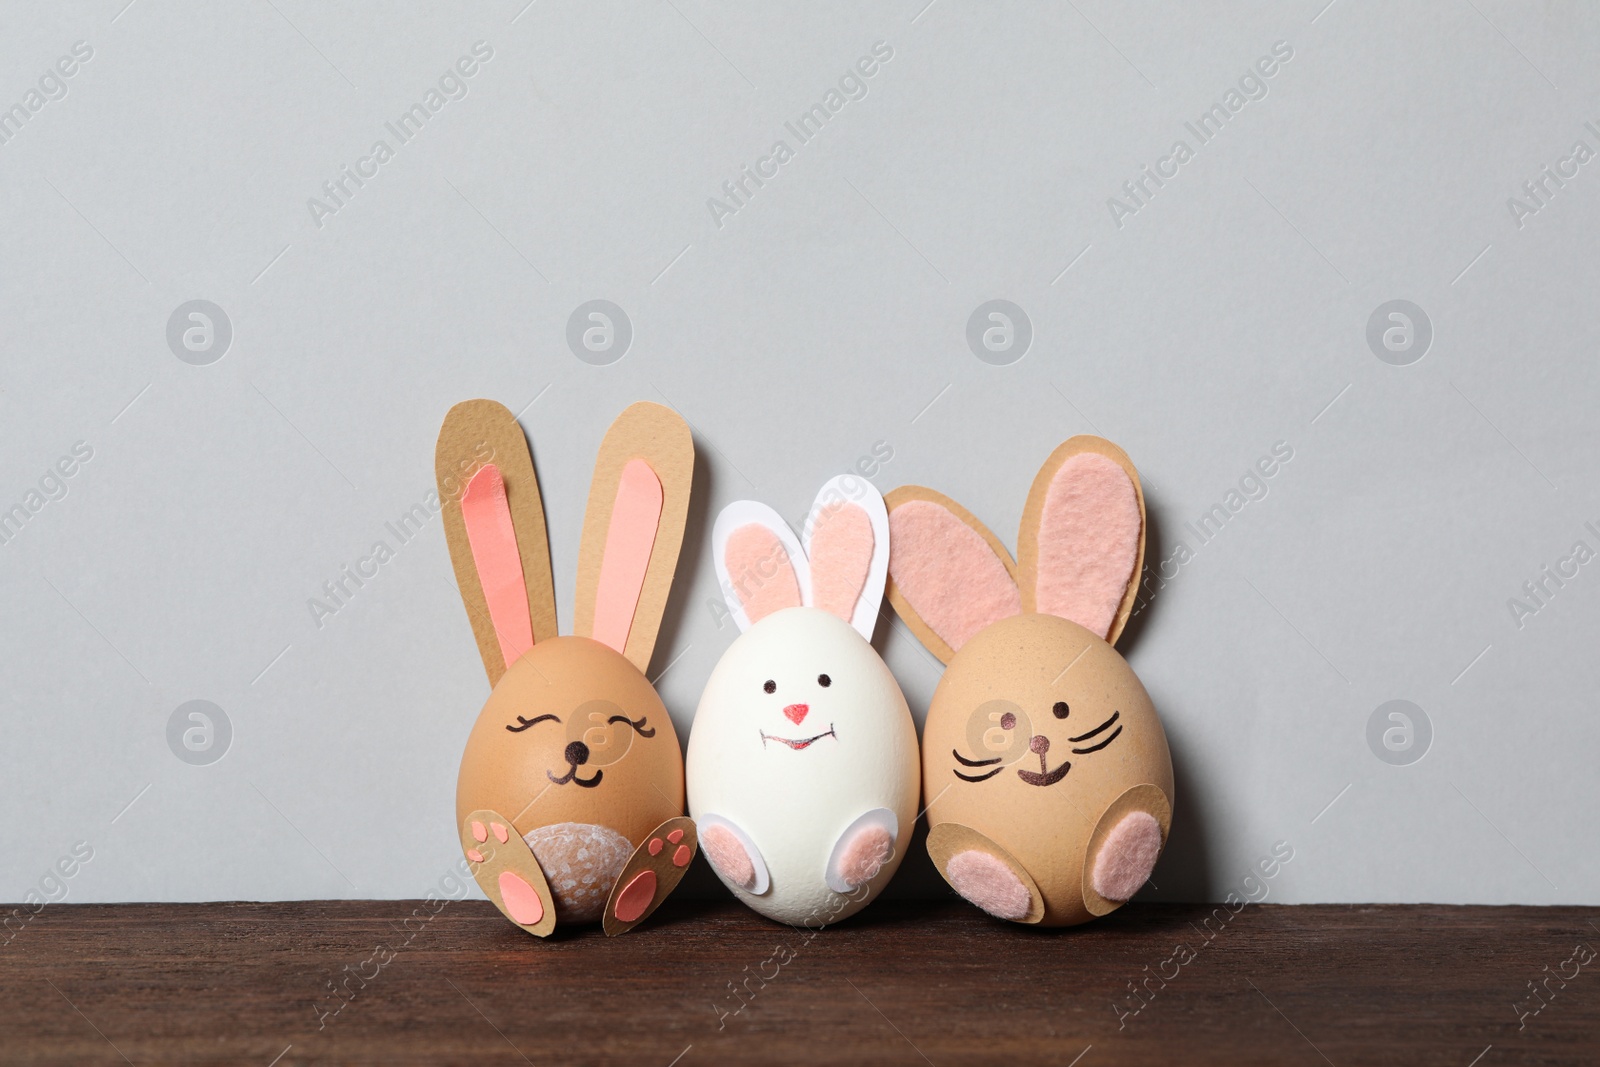 Photo of Eggs as cute bunnies on wooden table against light grey background, space for text. Easter celebration